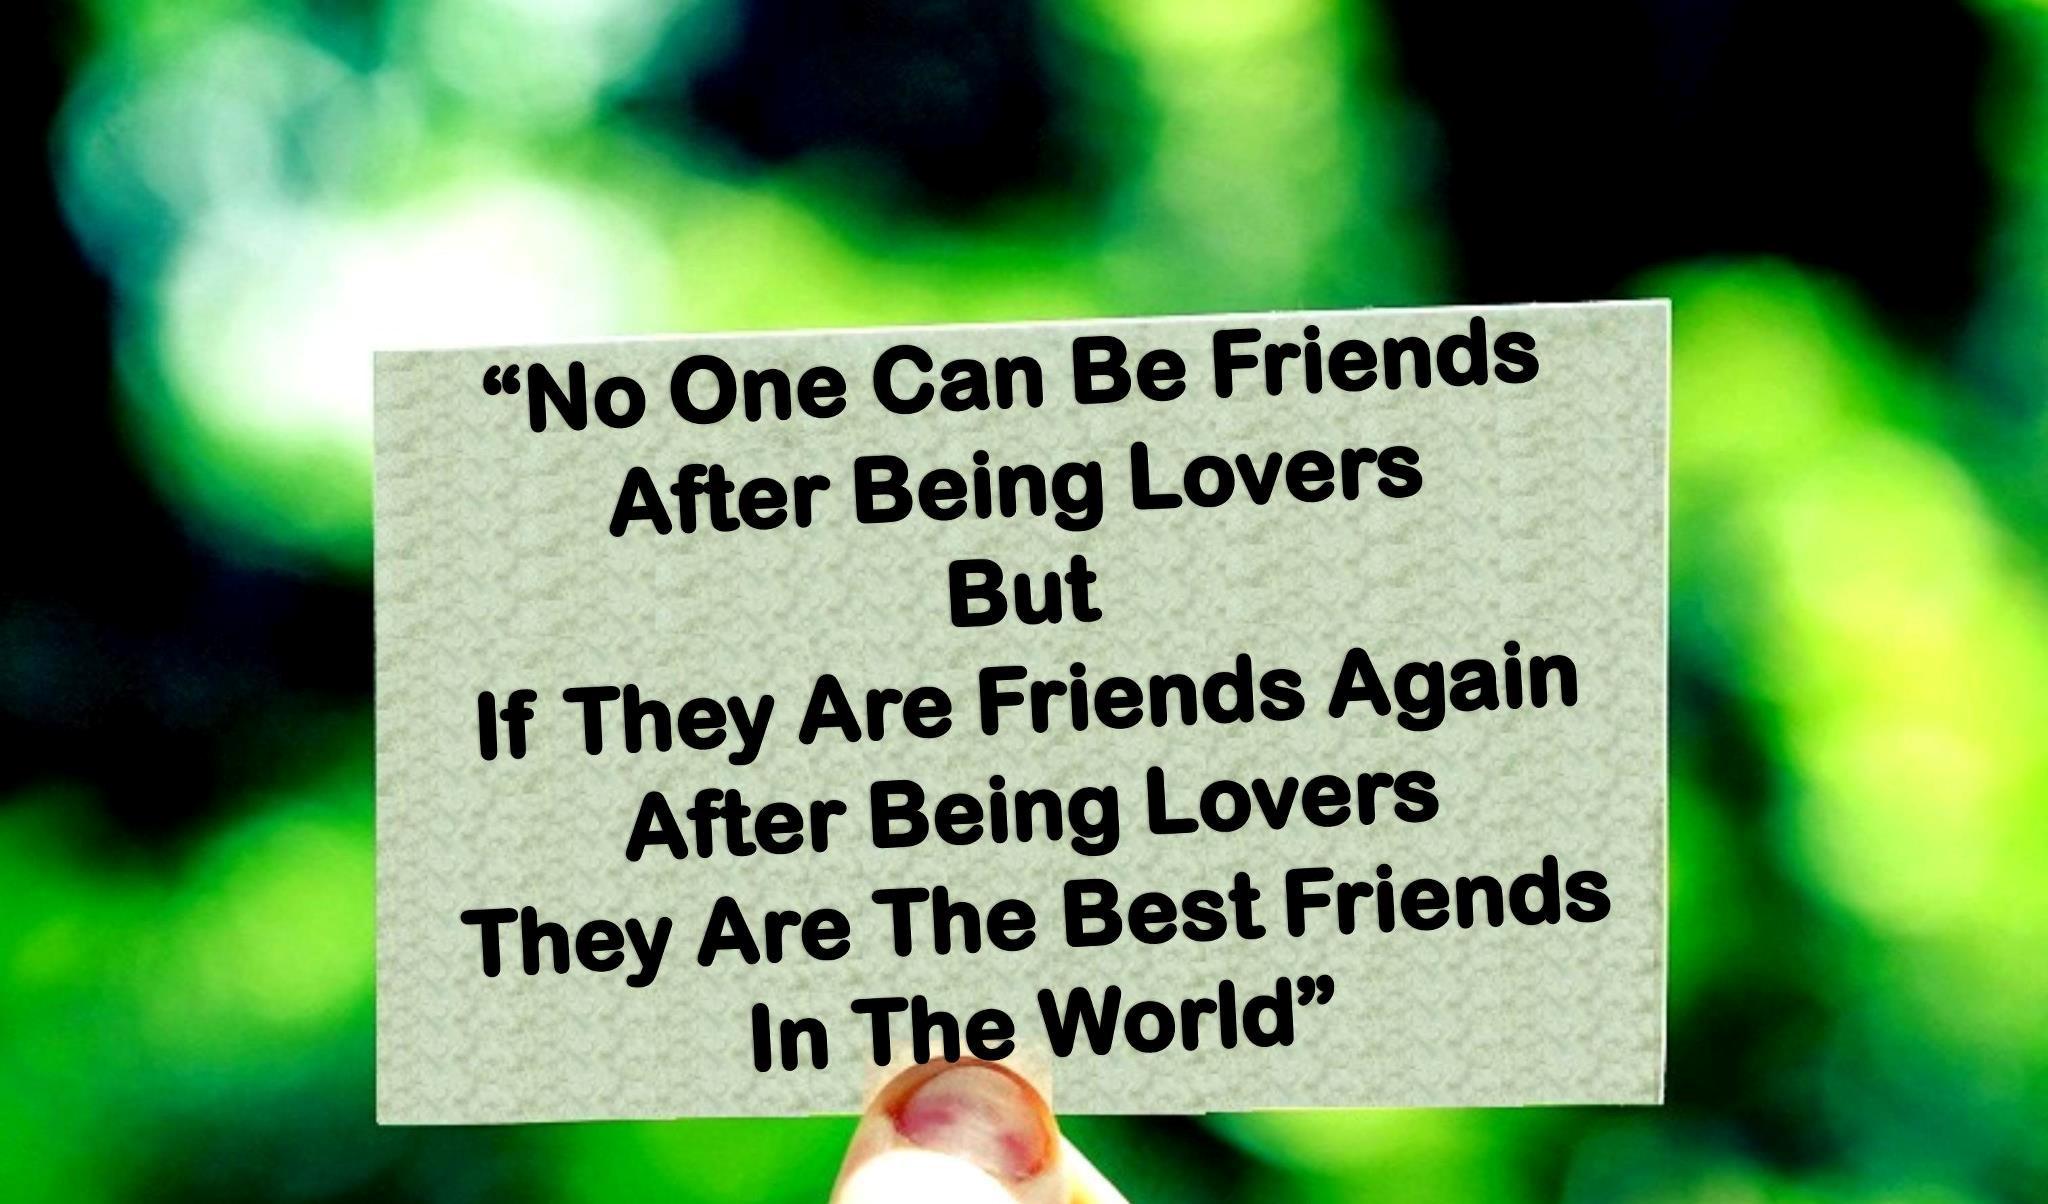 lovers-are-the-best-friends-in-world